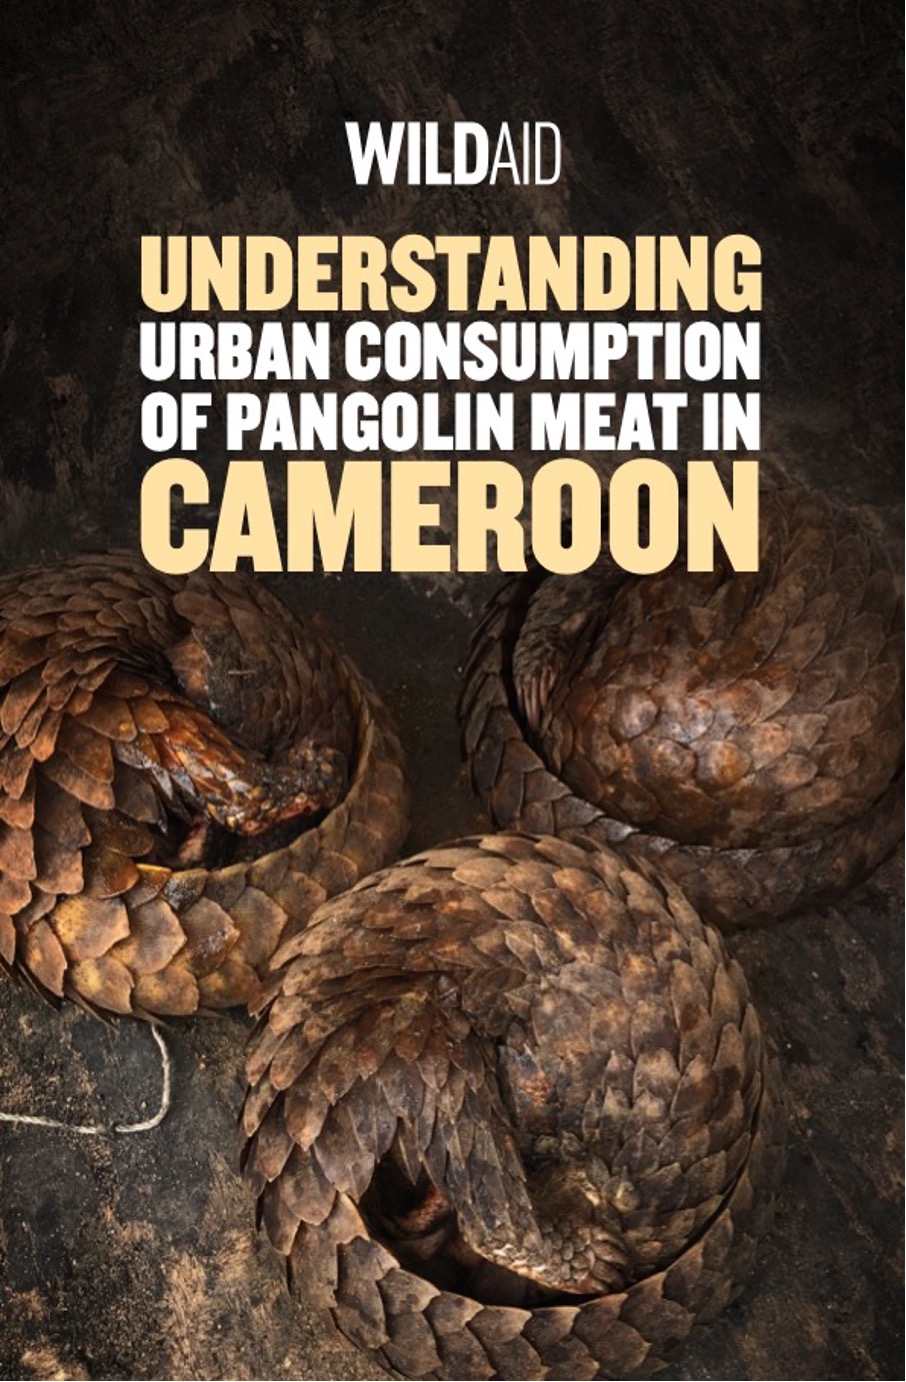 Pangolin conservation campaign launched for World Pangolin Day by the  Cameroon government and WildAid - WildAid